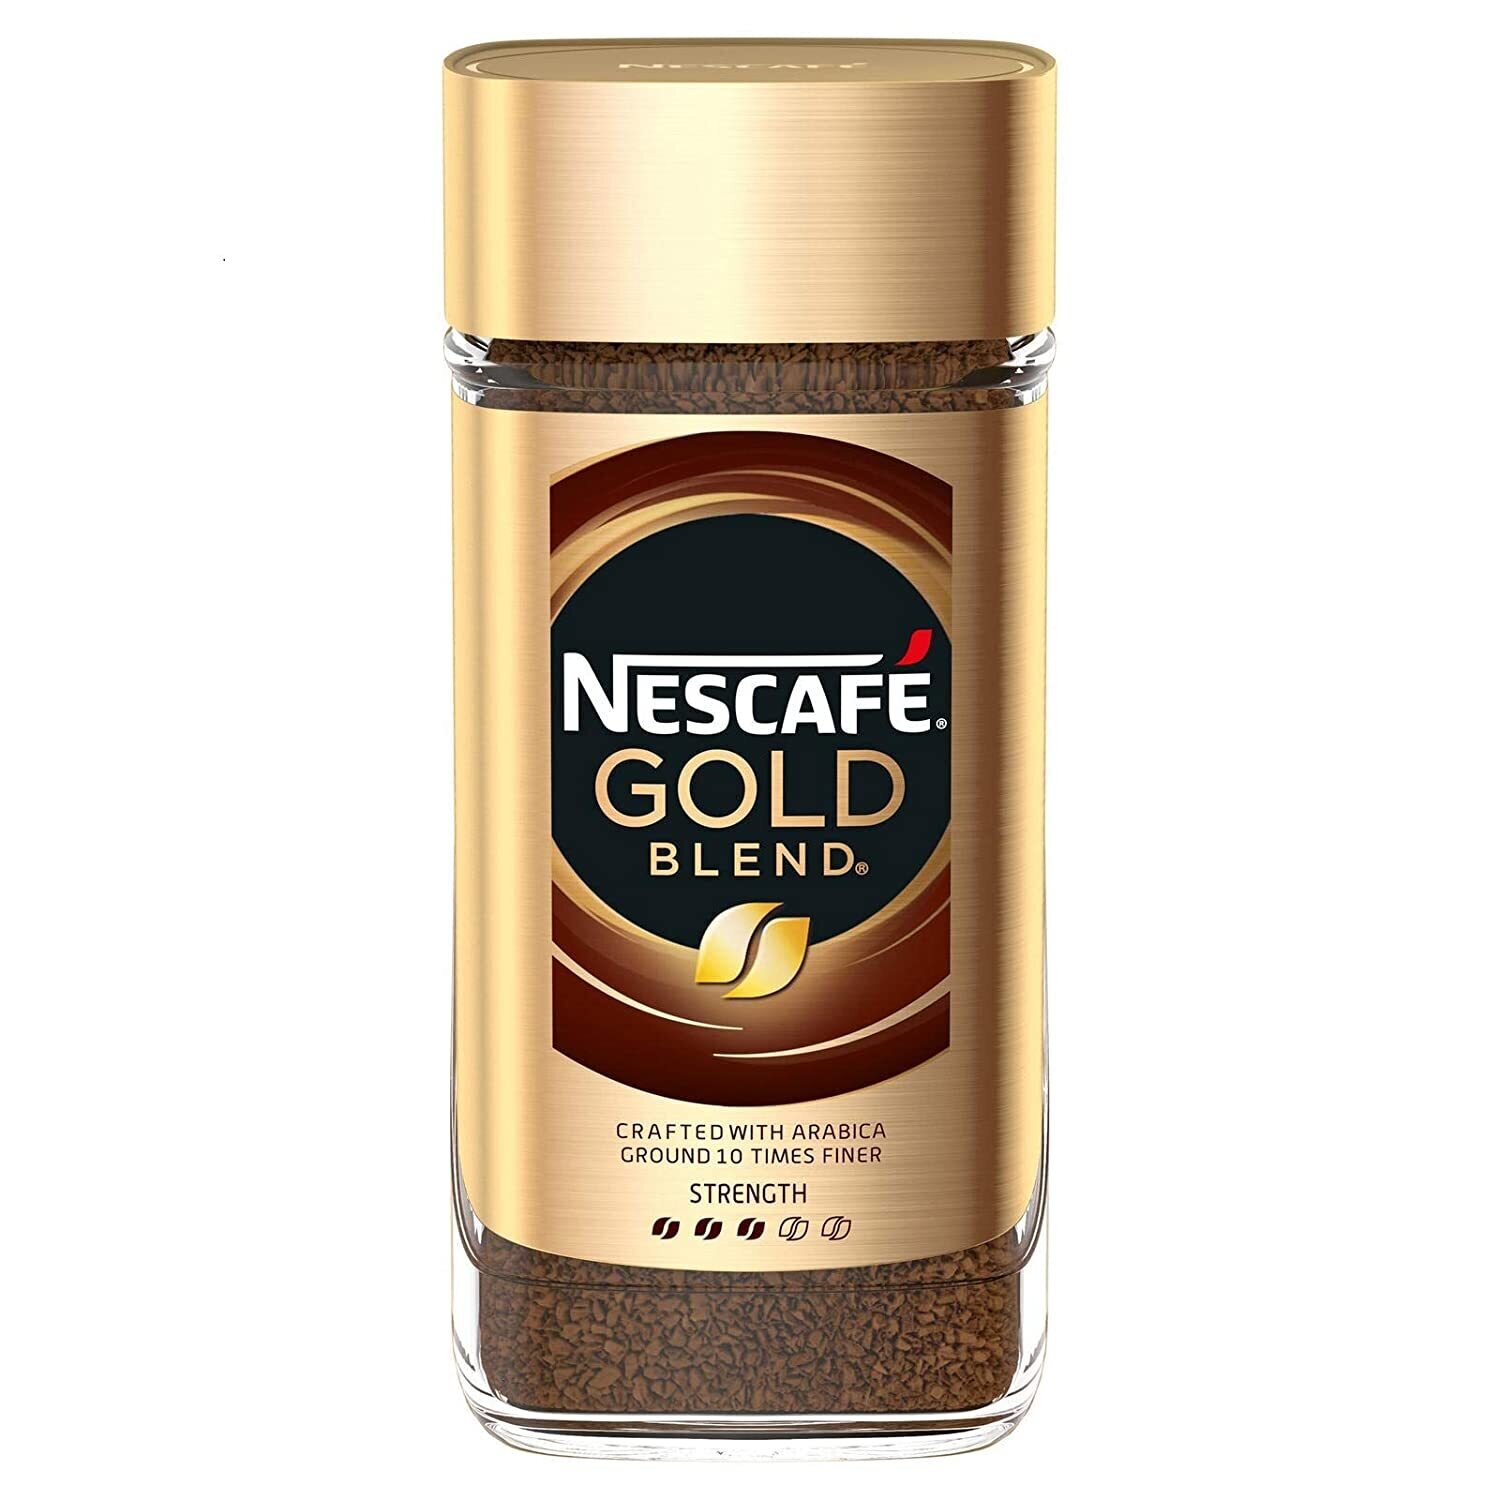 Nescafe Gold Blend | Imported | Premium Coffee